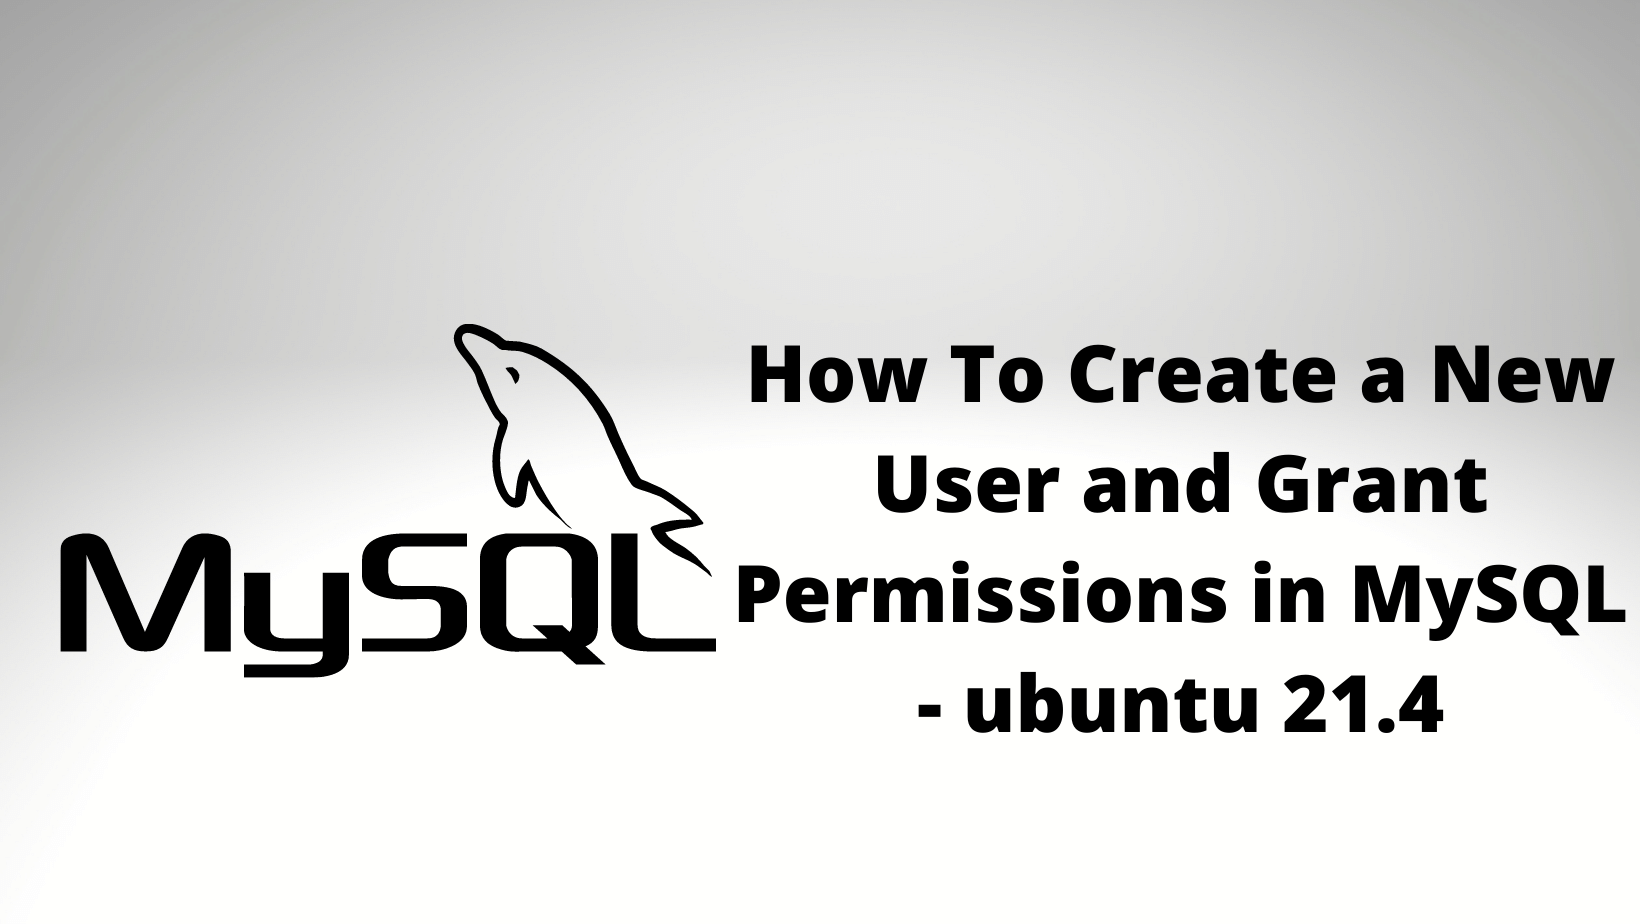 How To Create a New User and Grant Permissions in MySQL - ubuntu 21.4